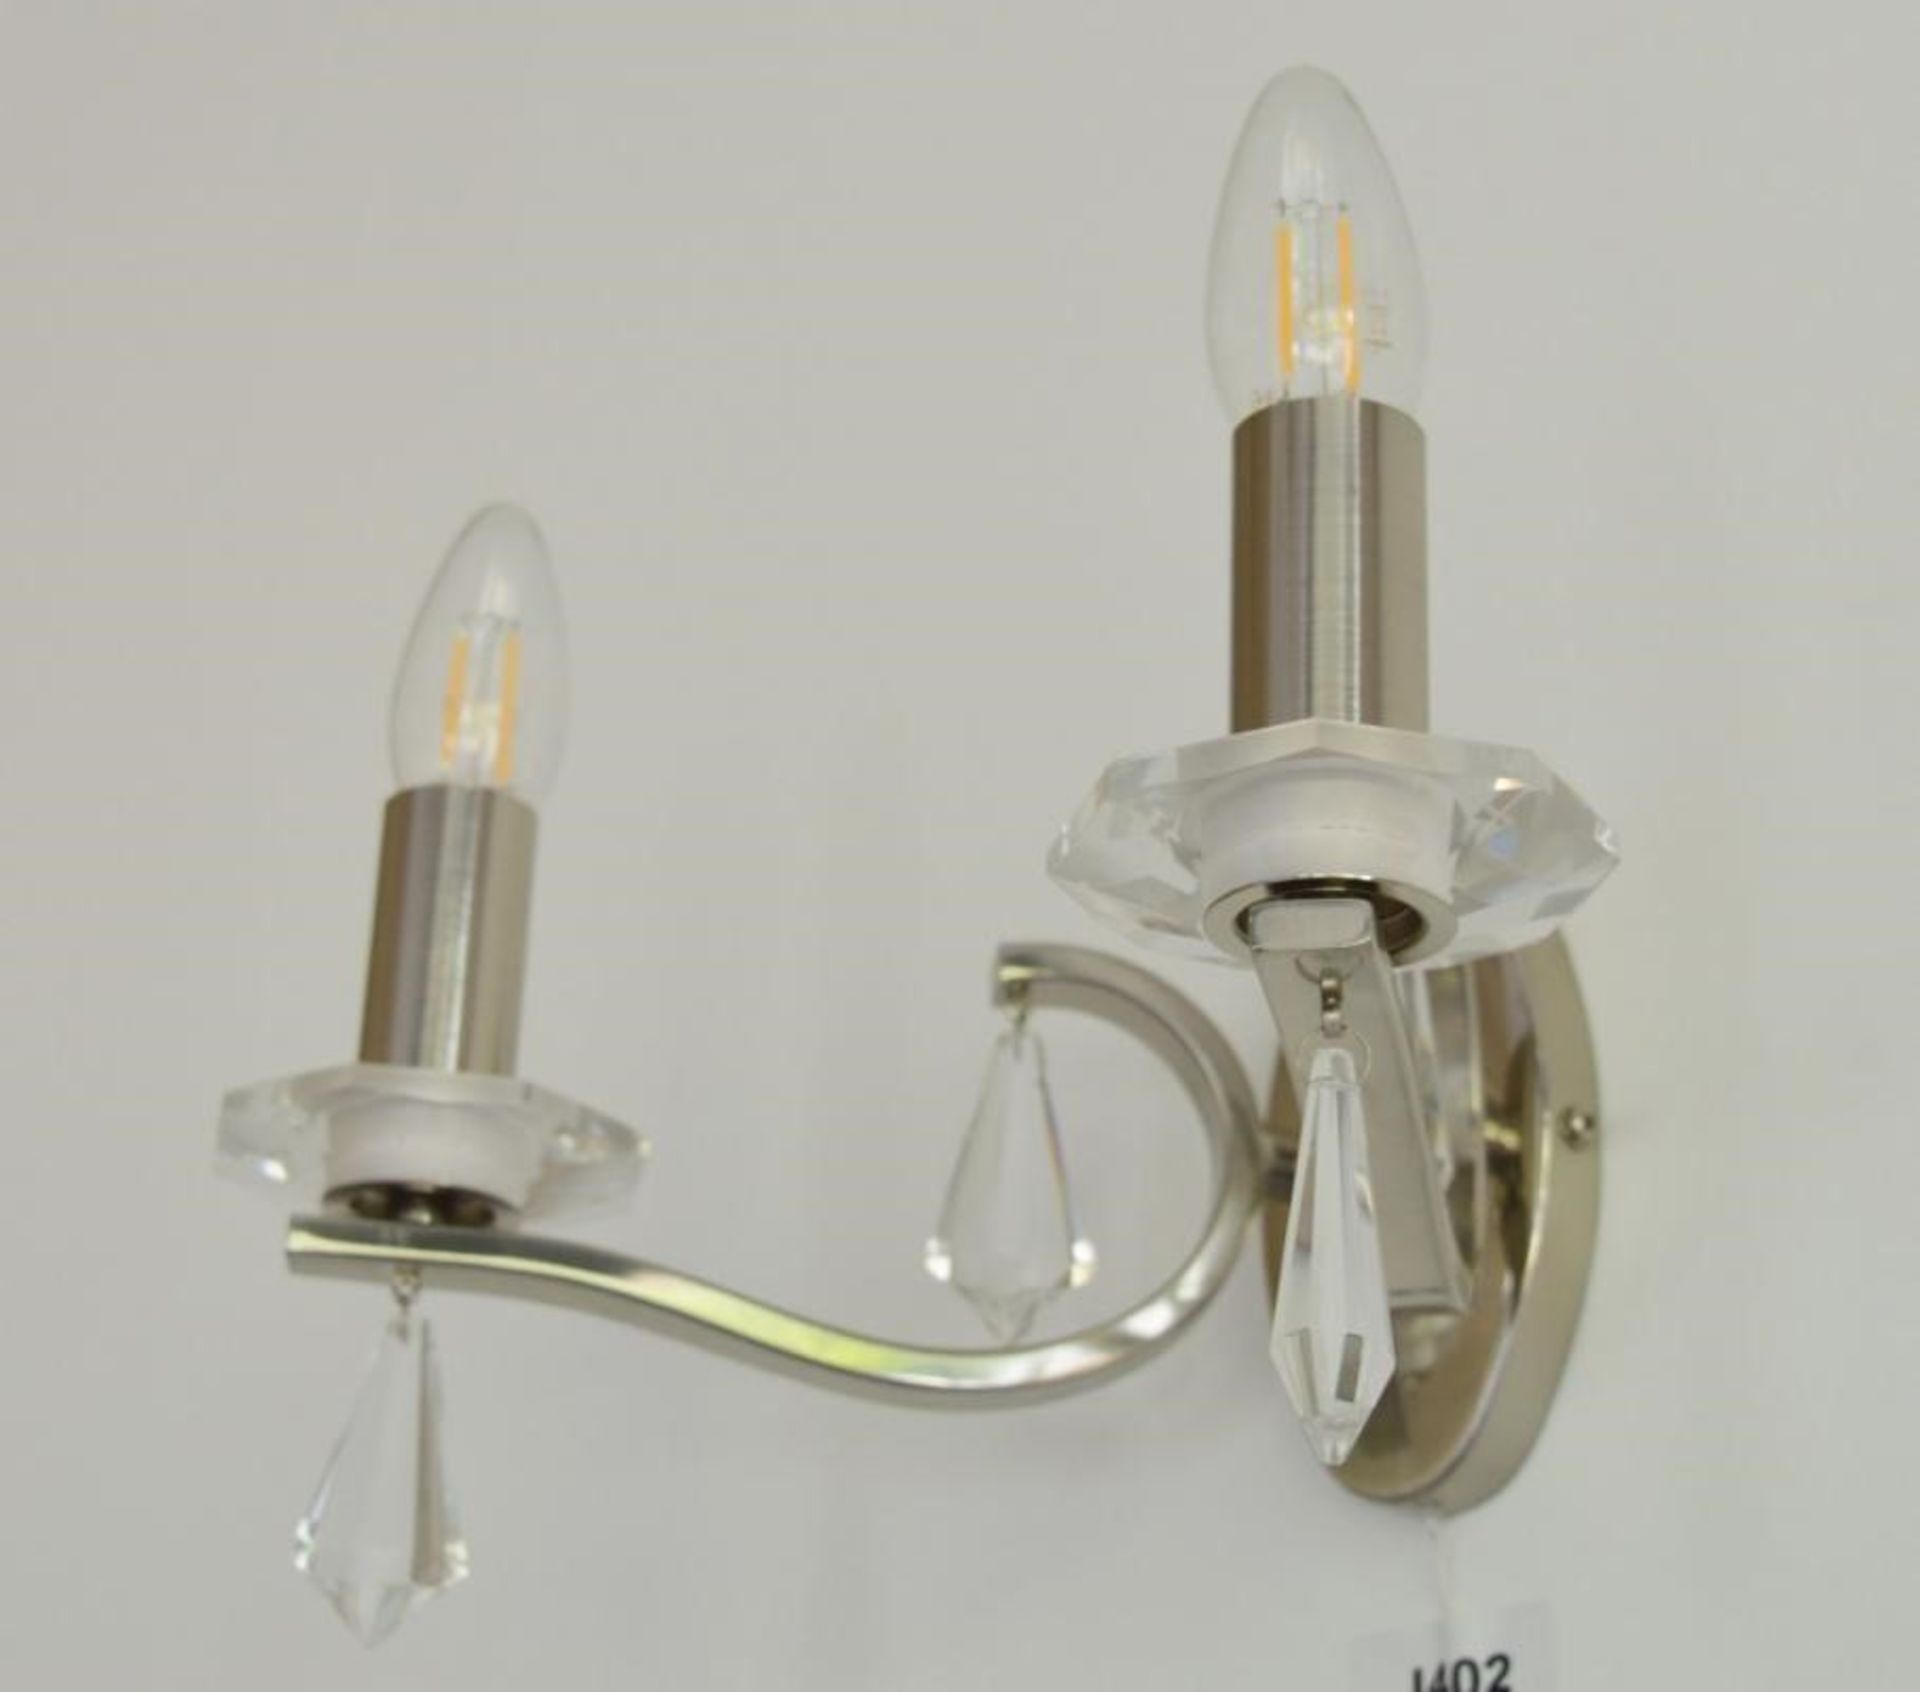 1 x Royale Satin Silver Metal Wall Light Fitting With Hexagonal Glass Sconces - Ex Display Stock - C - Image 4 of 4